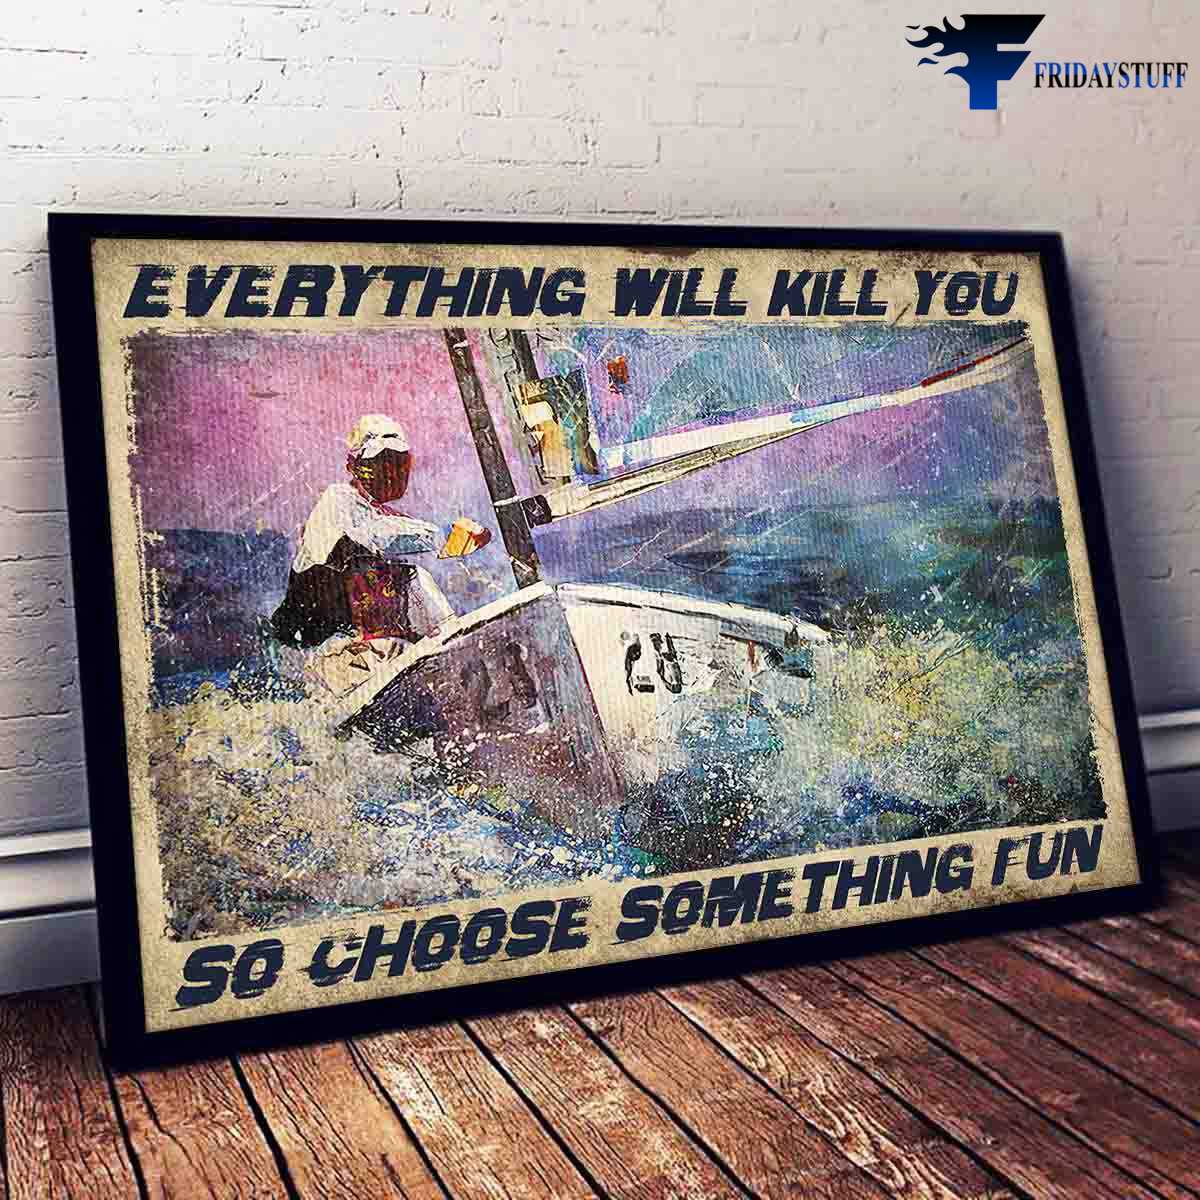 Canoeing At Sea - Everything Will Kill You, So Choose Something Fun, Canoeing Man